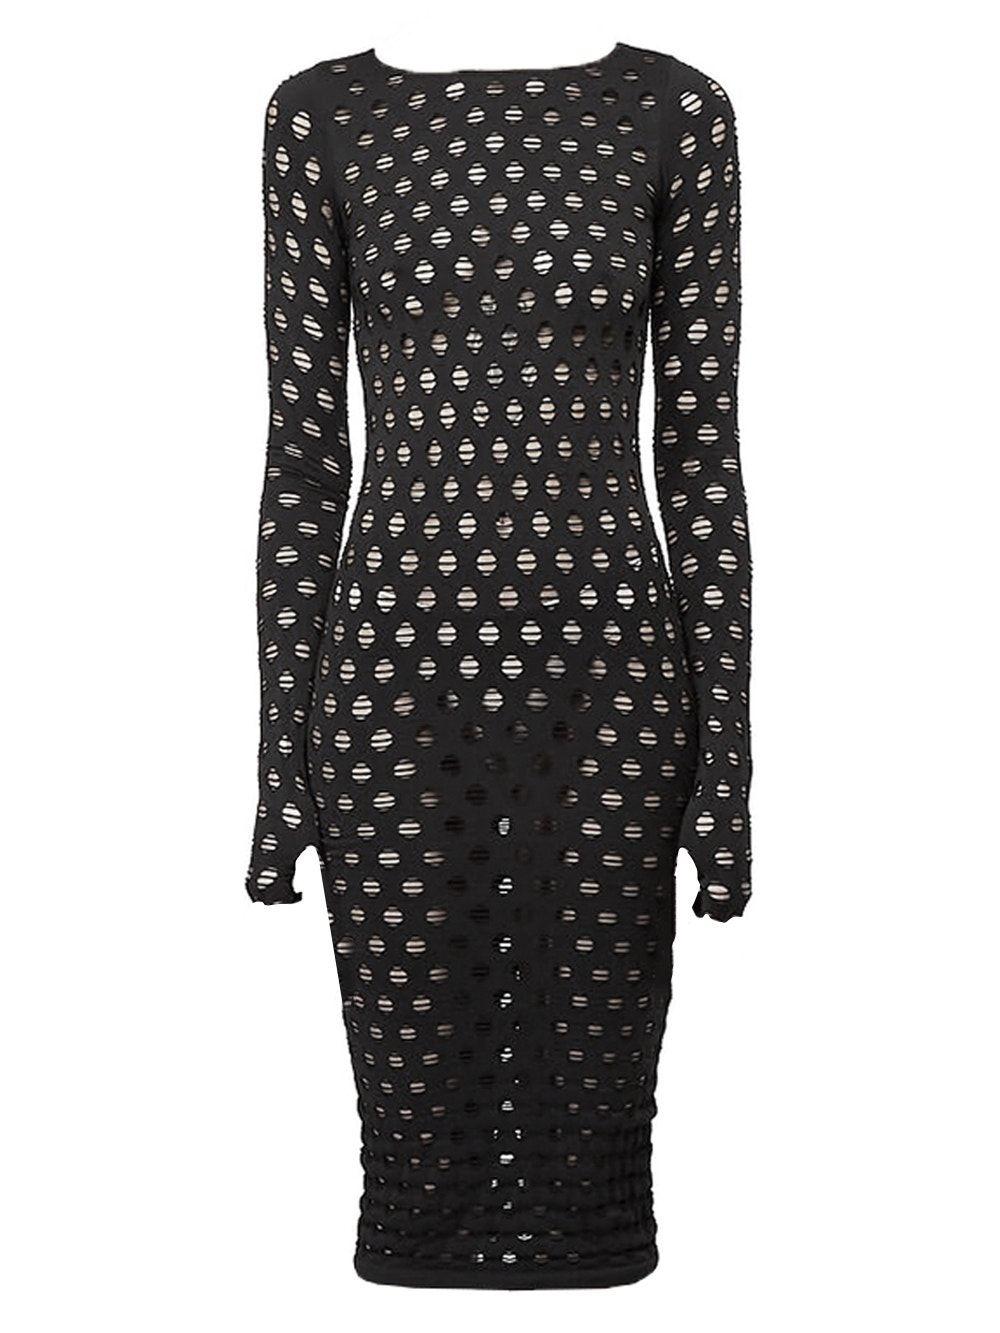 Maisie Wilen Perforated Long-sleeve Midi Dress in Black | Lyst